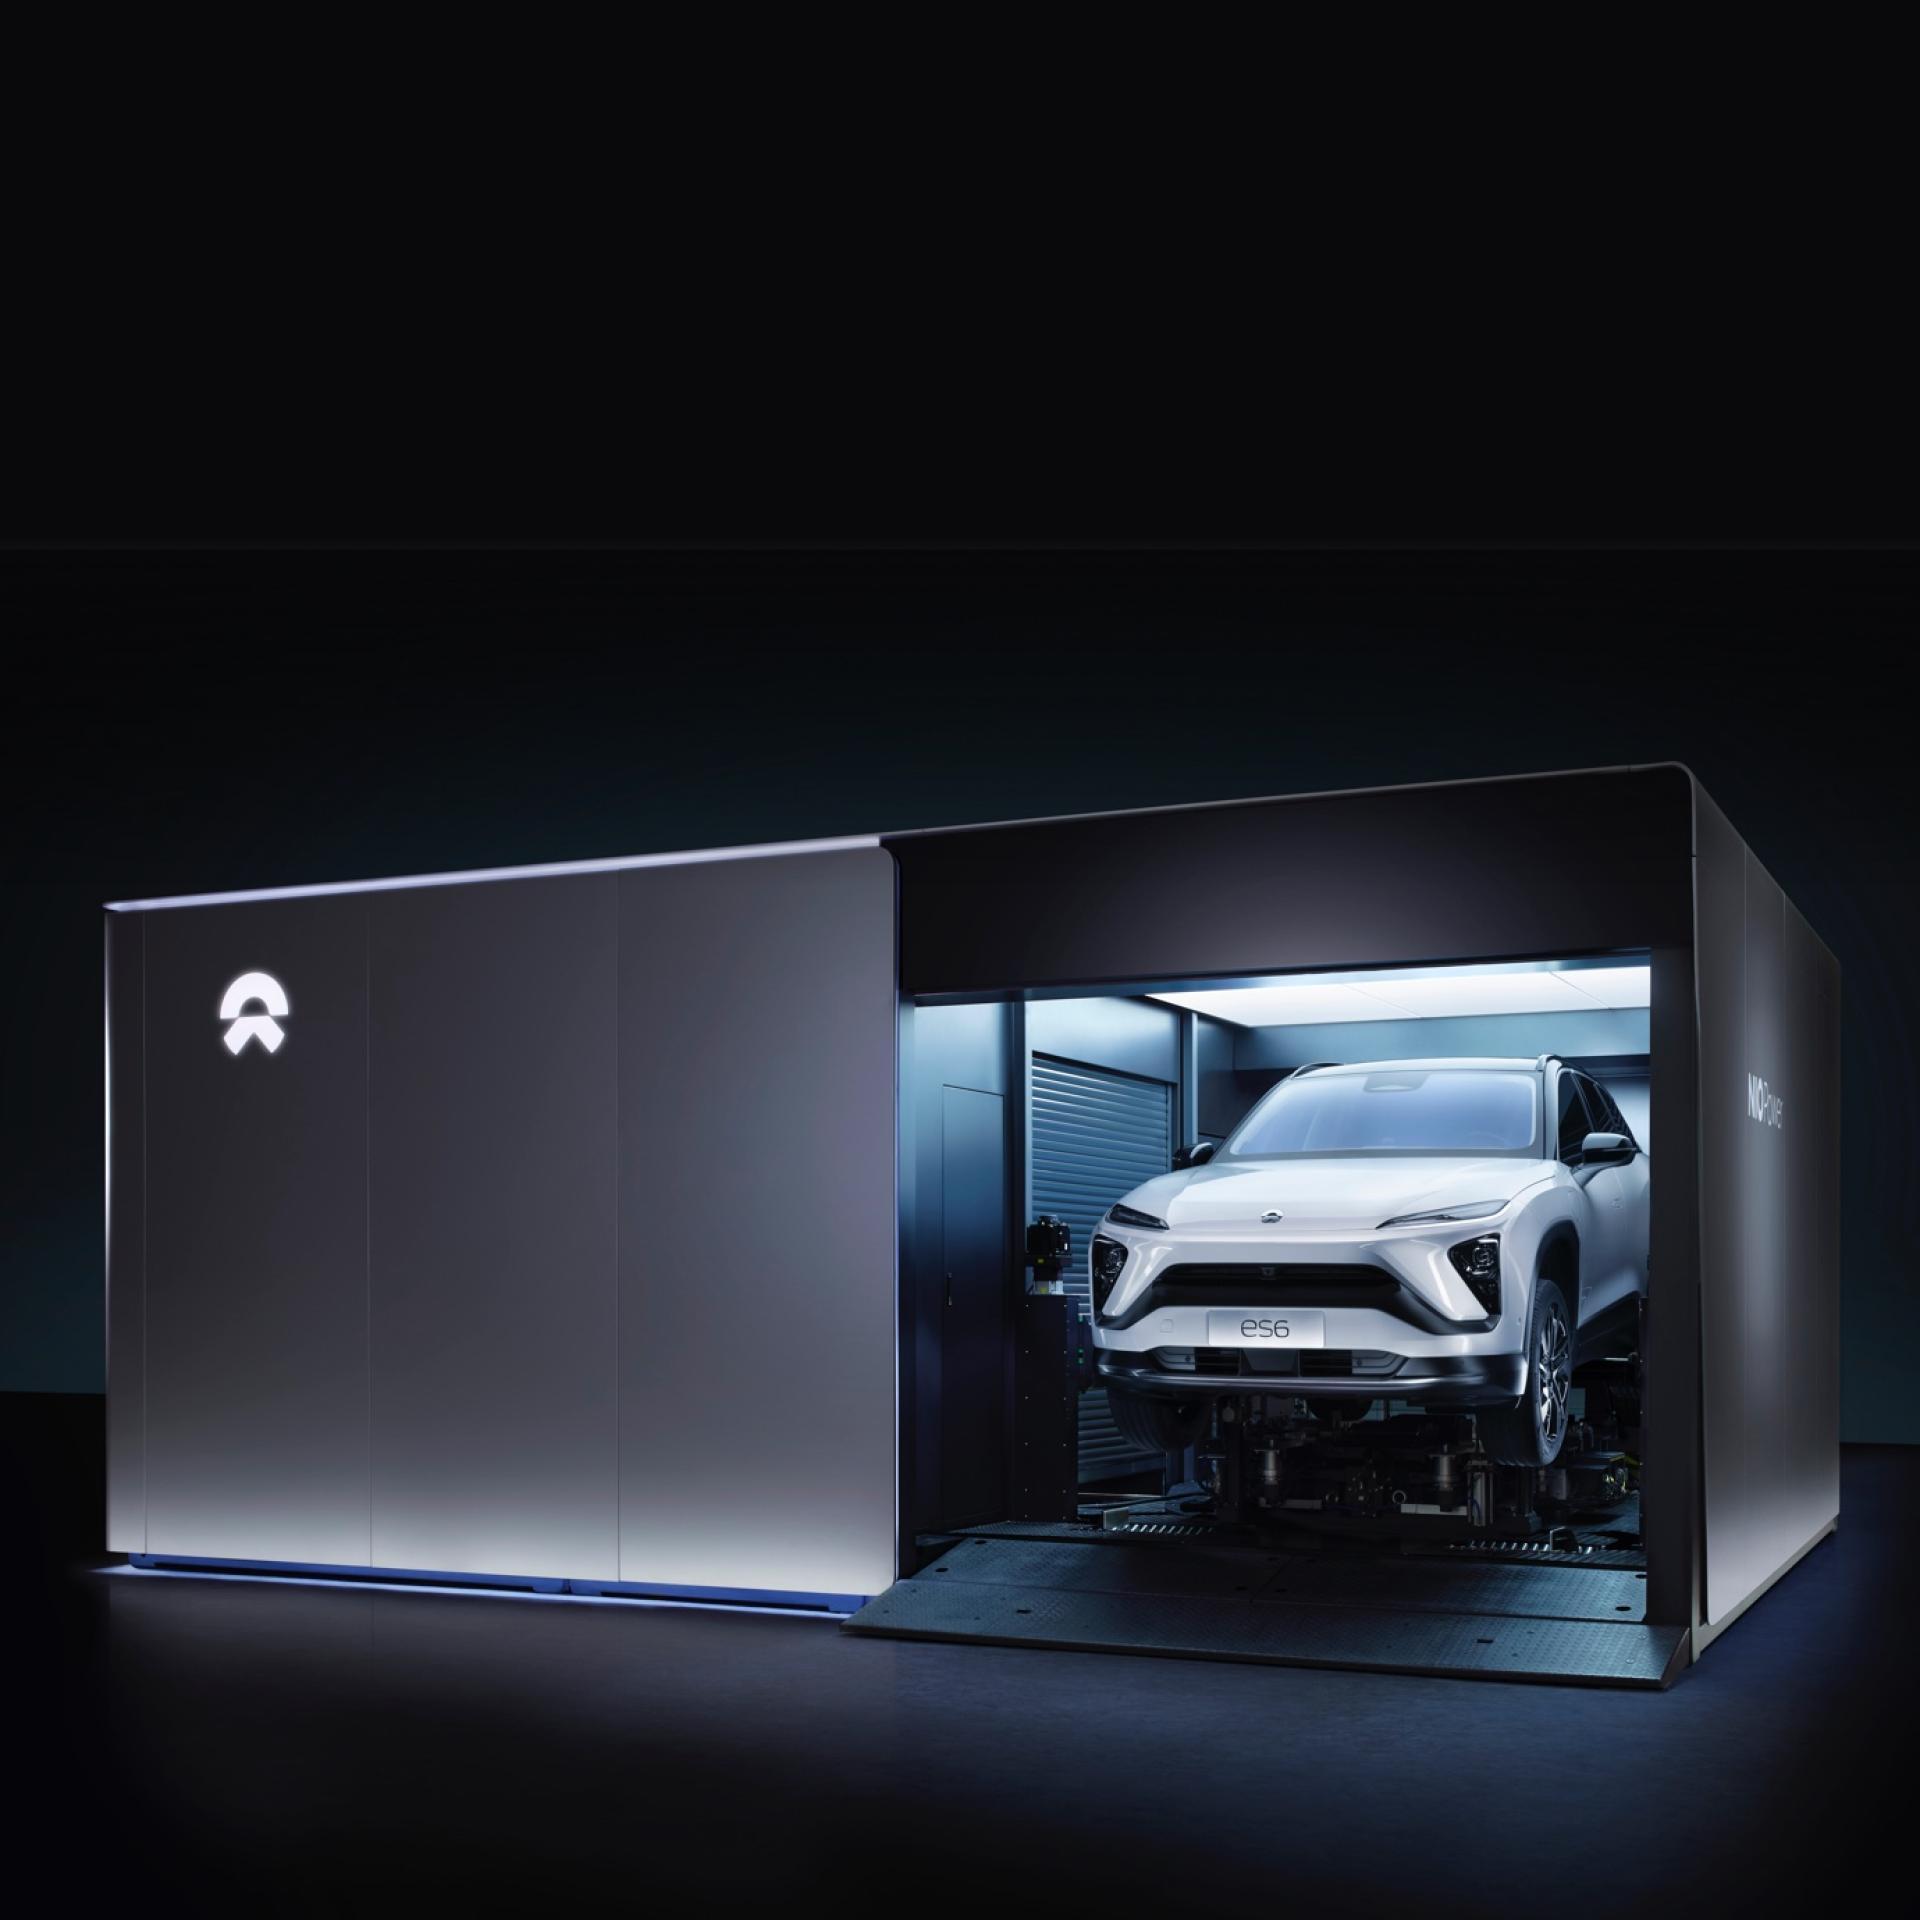 NIO's Stock Forecast Where Will It Be in 2025?